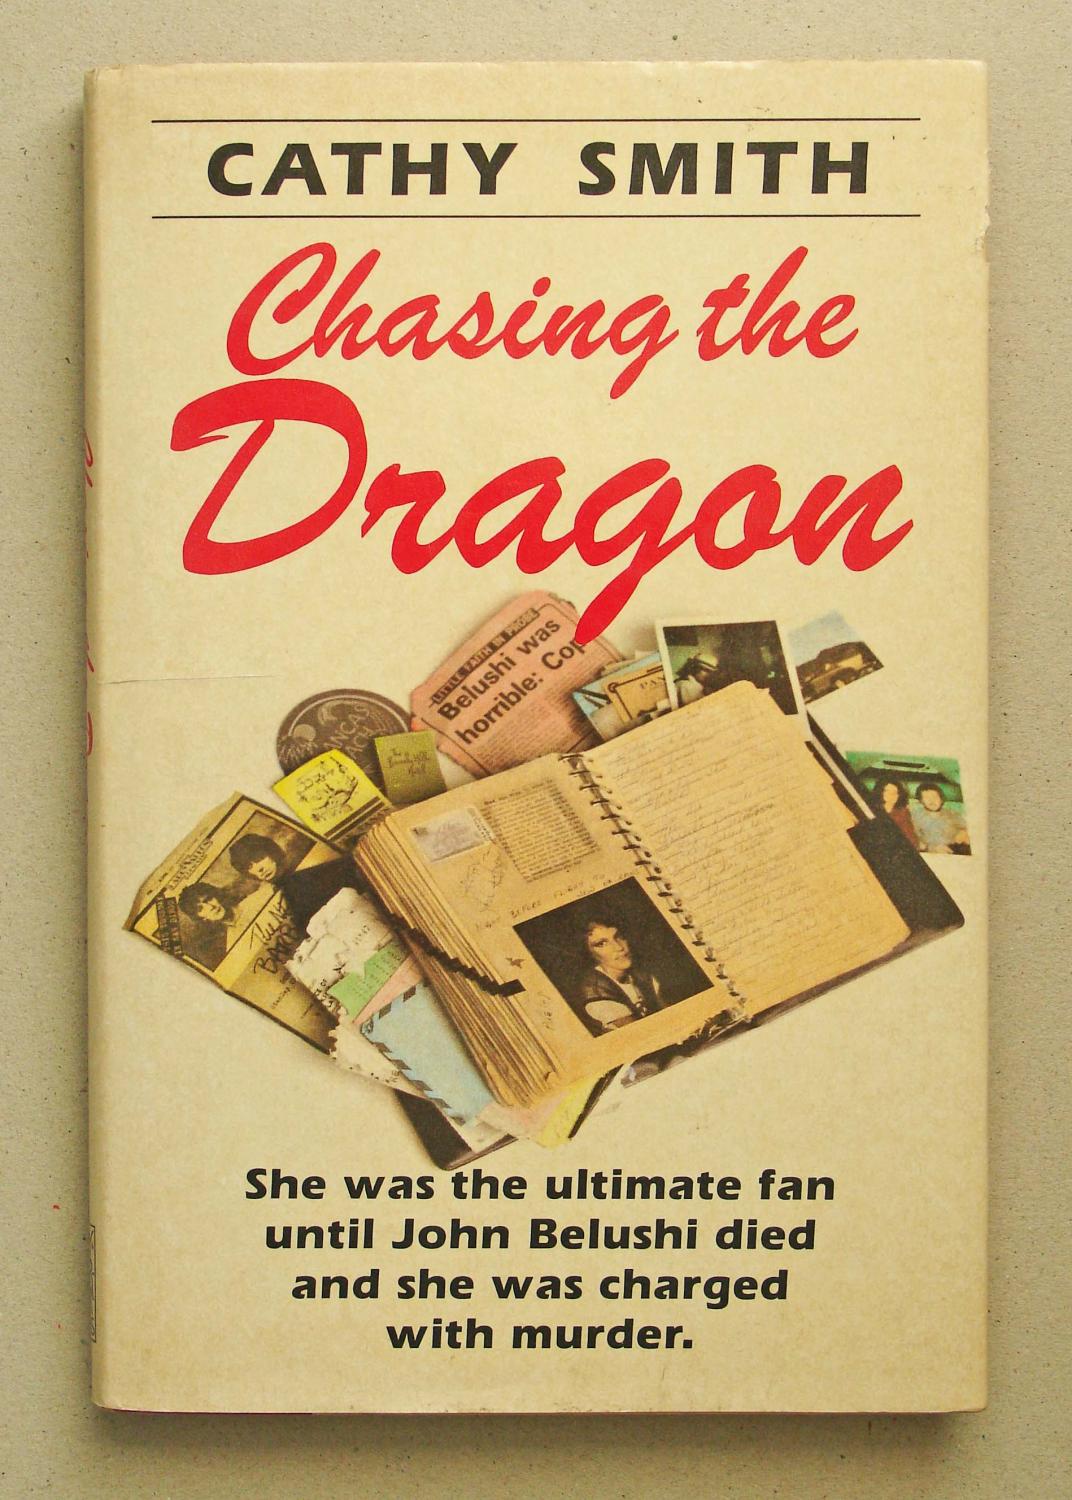 Chasing the dragon cathy smith